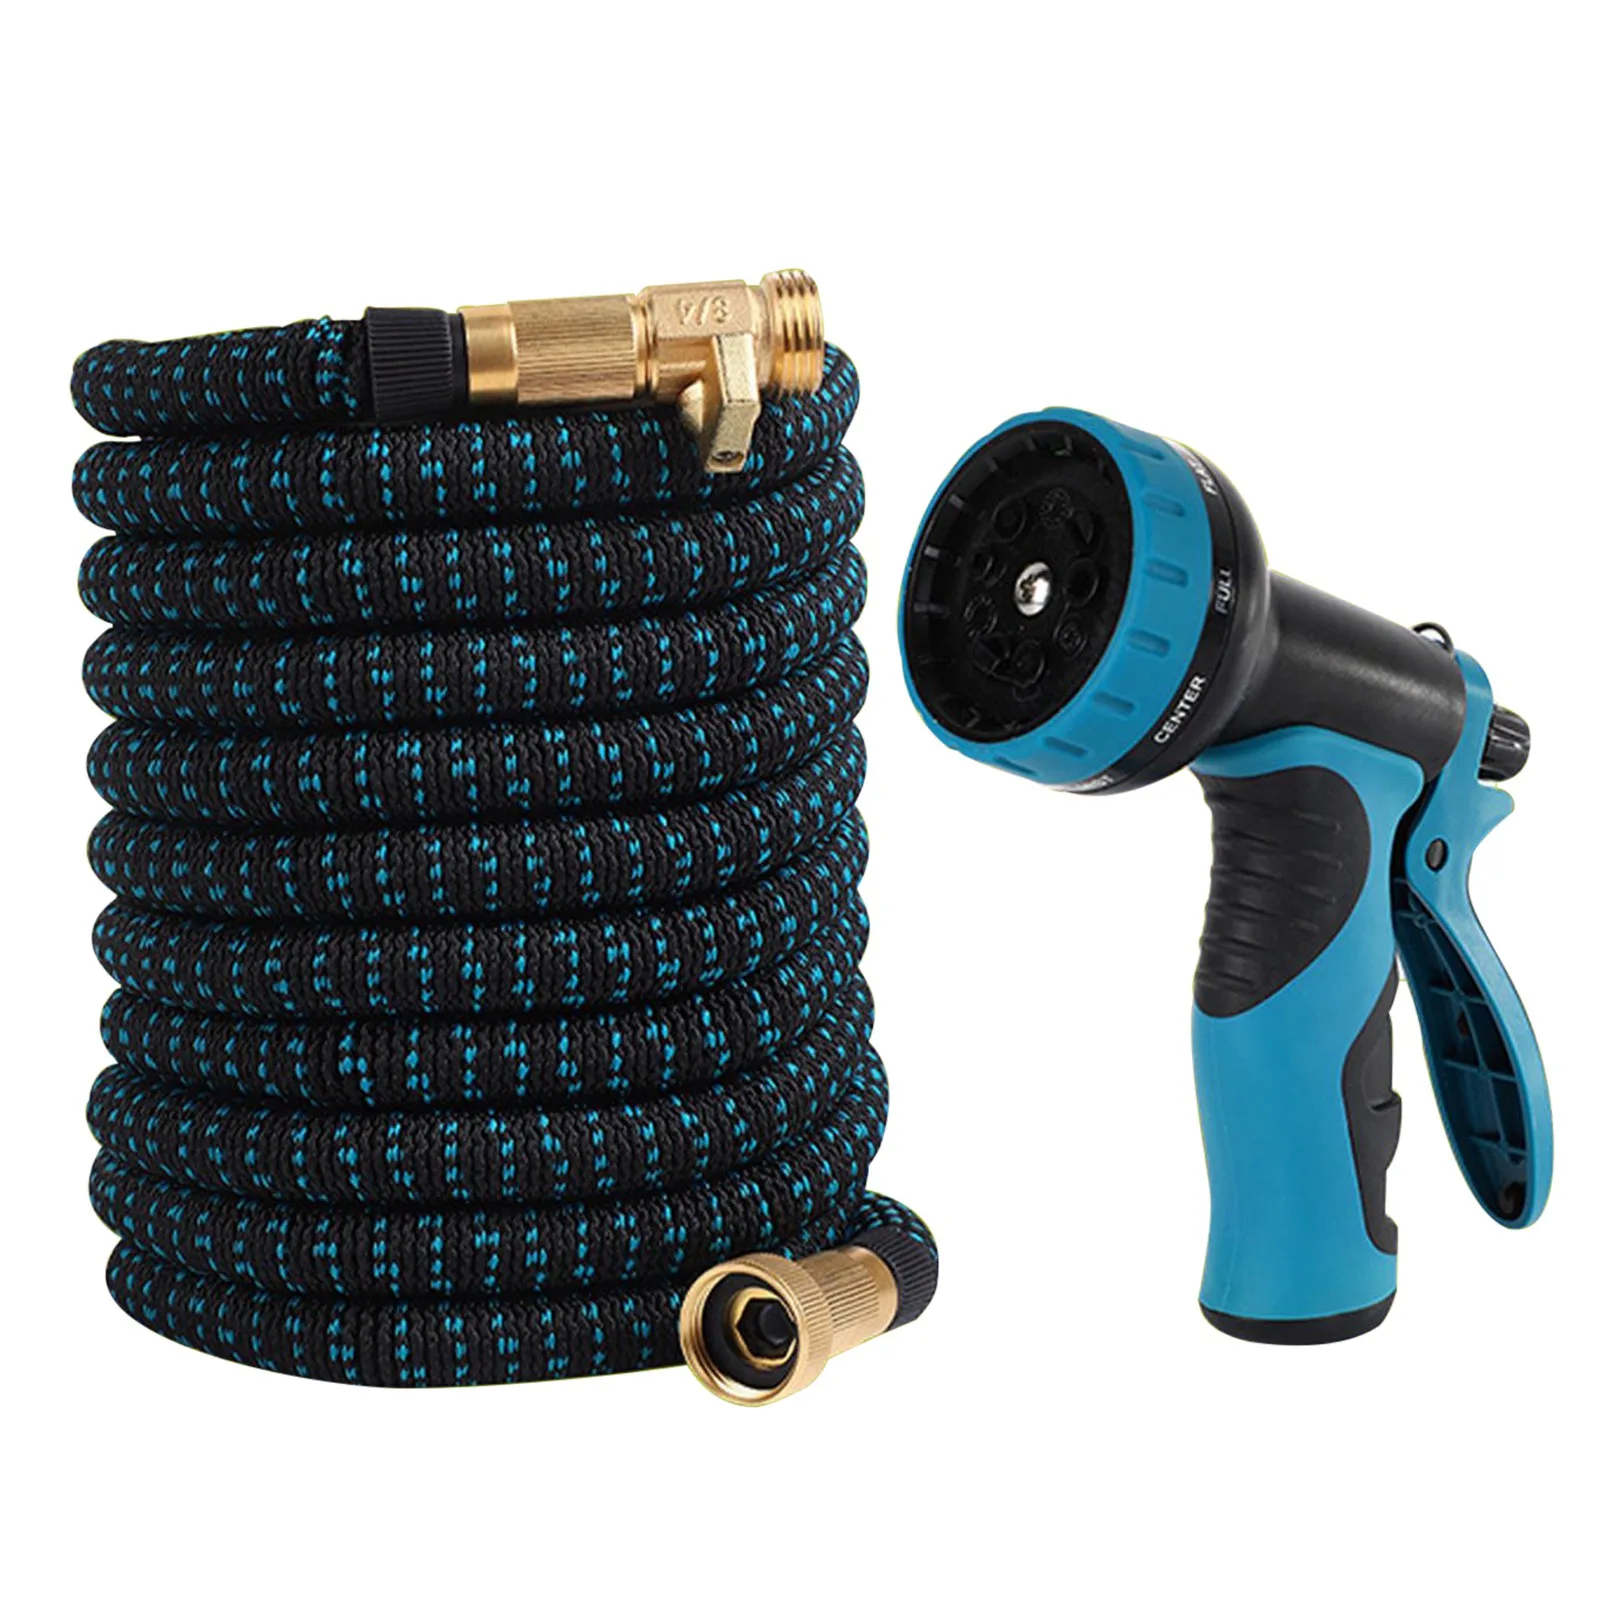 25Ft Garden Hose Pipe Expandable Flexible Water Hose 9 Modes Magic Irrigation System Watering Gun High Pressuer Car Washer